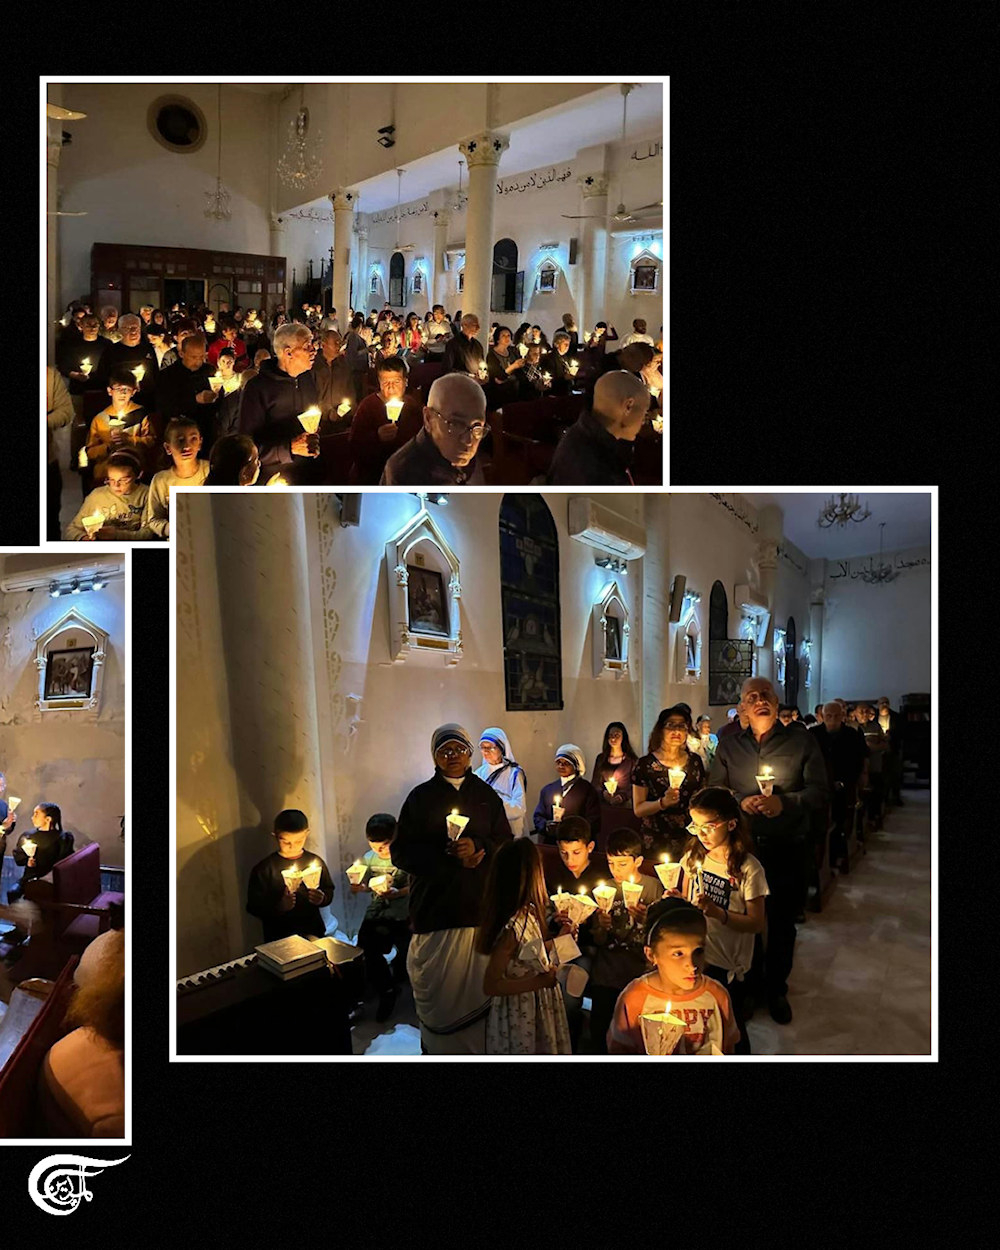 Christians in Gaza observed Easter in darkness